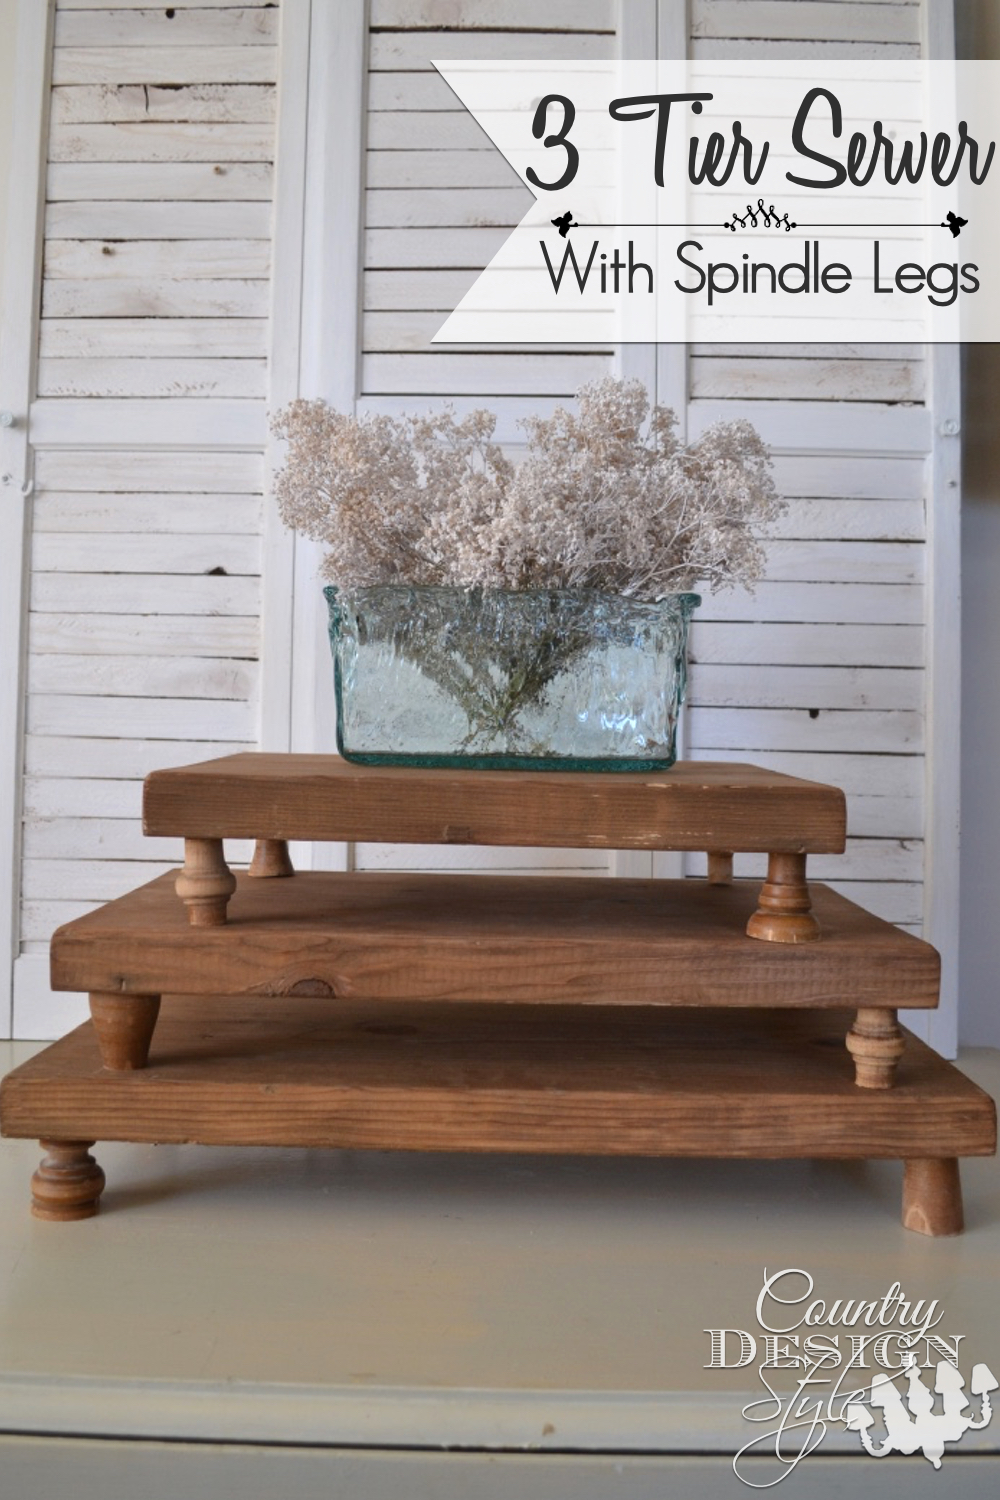 3 Tier Server with Spindle Legs | Country Design Style | countrydesignstyle.com